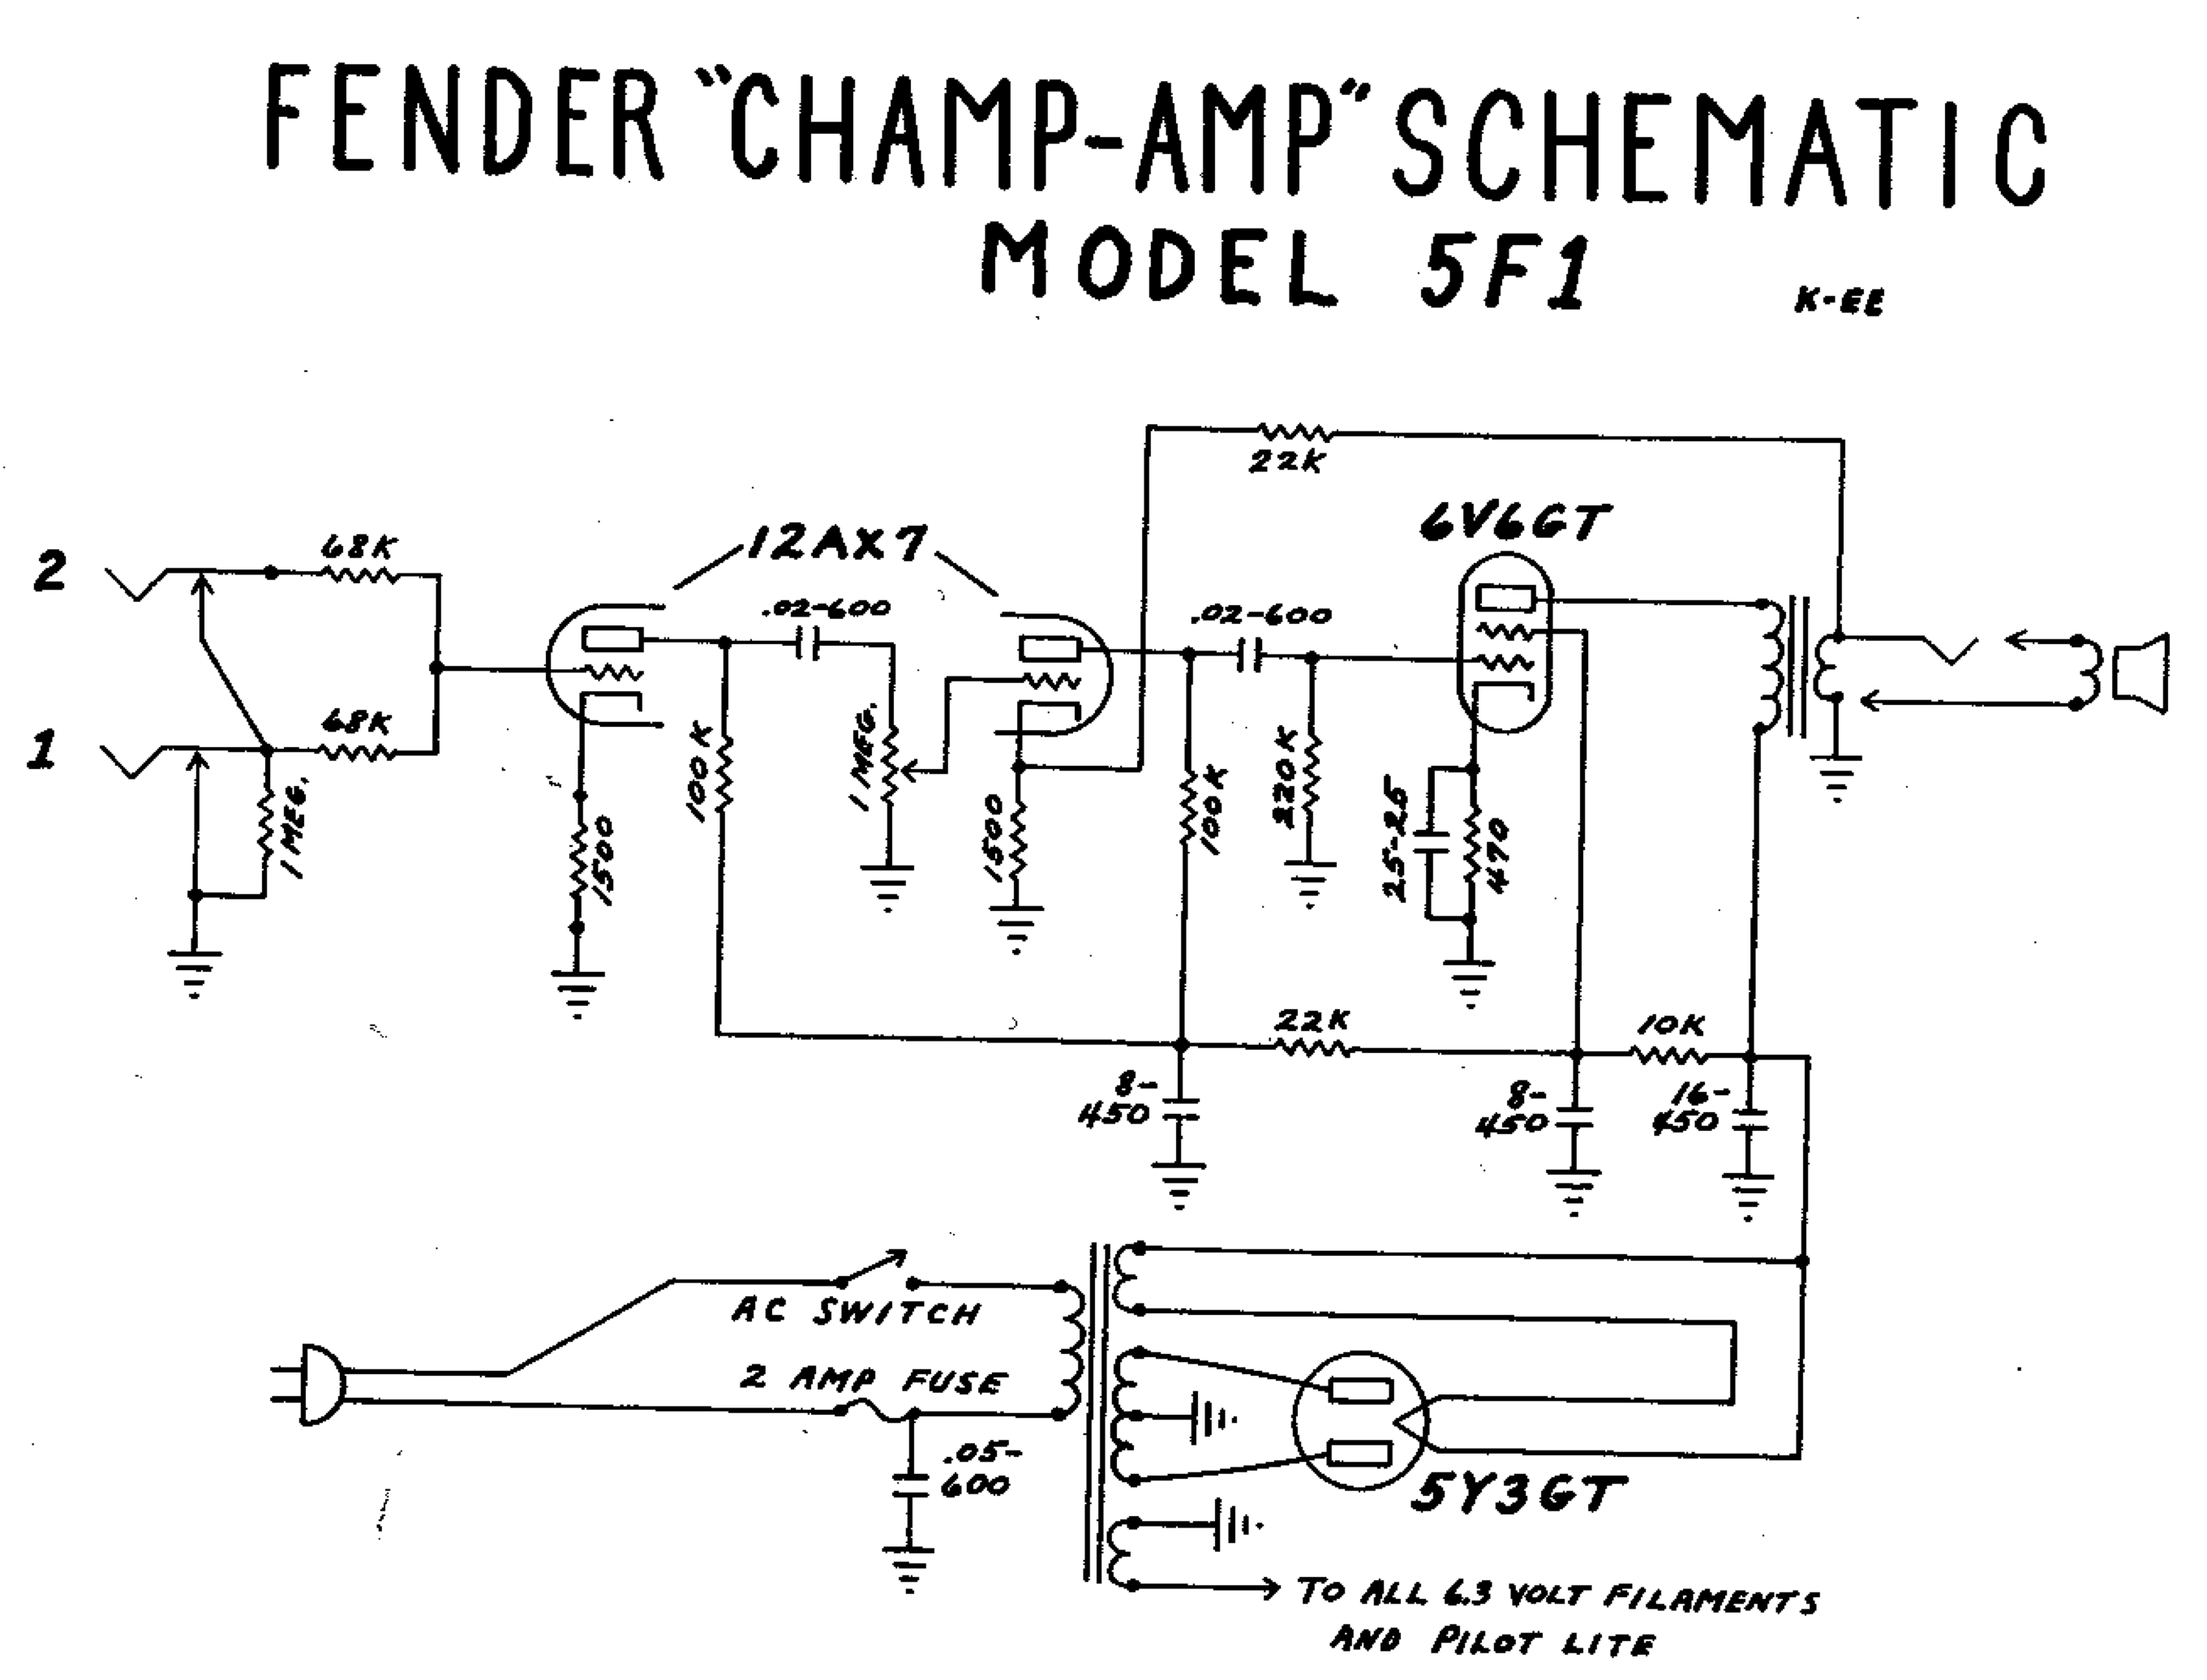 Fender Mustang Wiring Schematic | Wiring Library - Fender Mustang Wiring Diagram